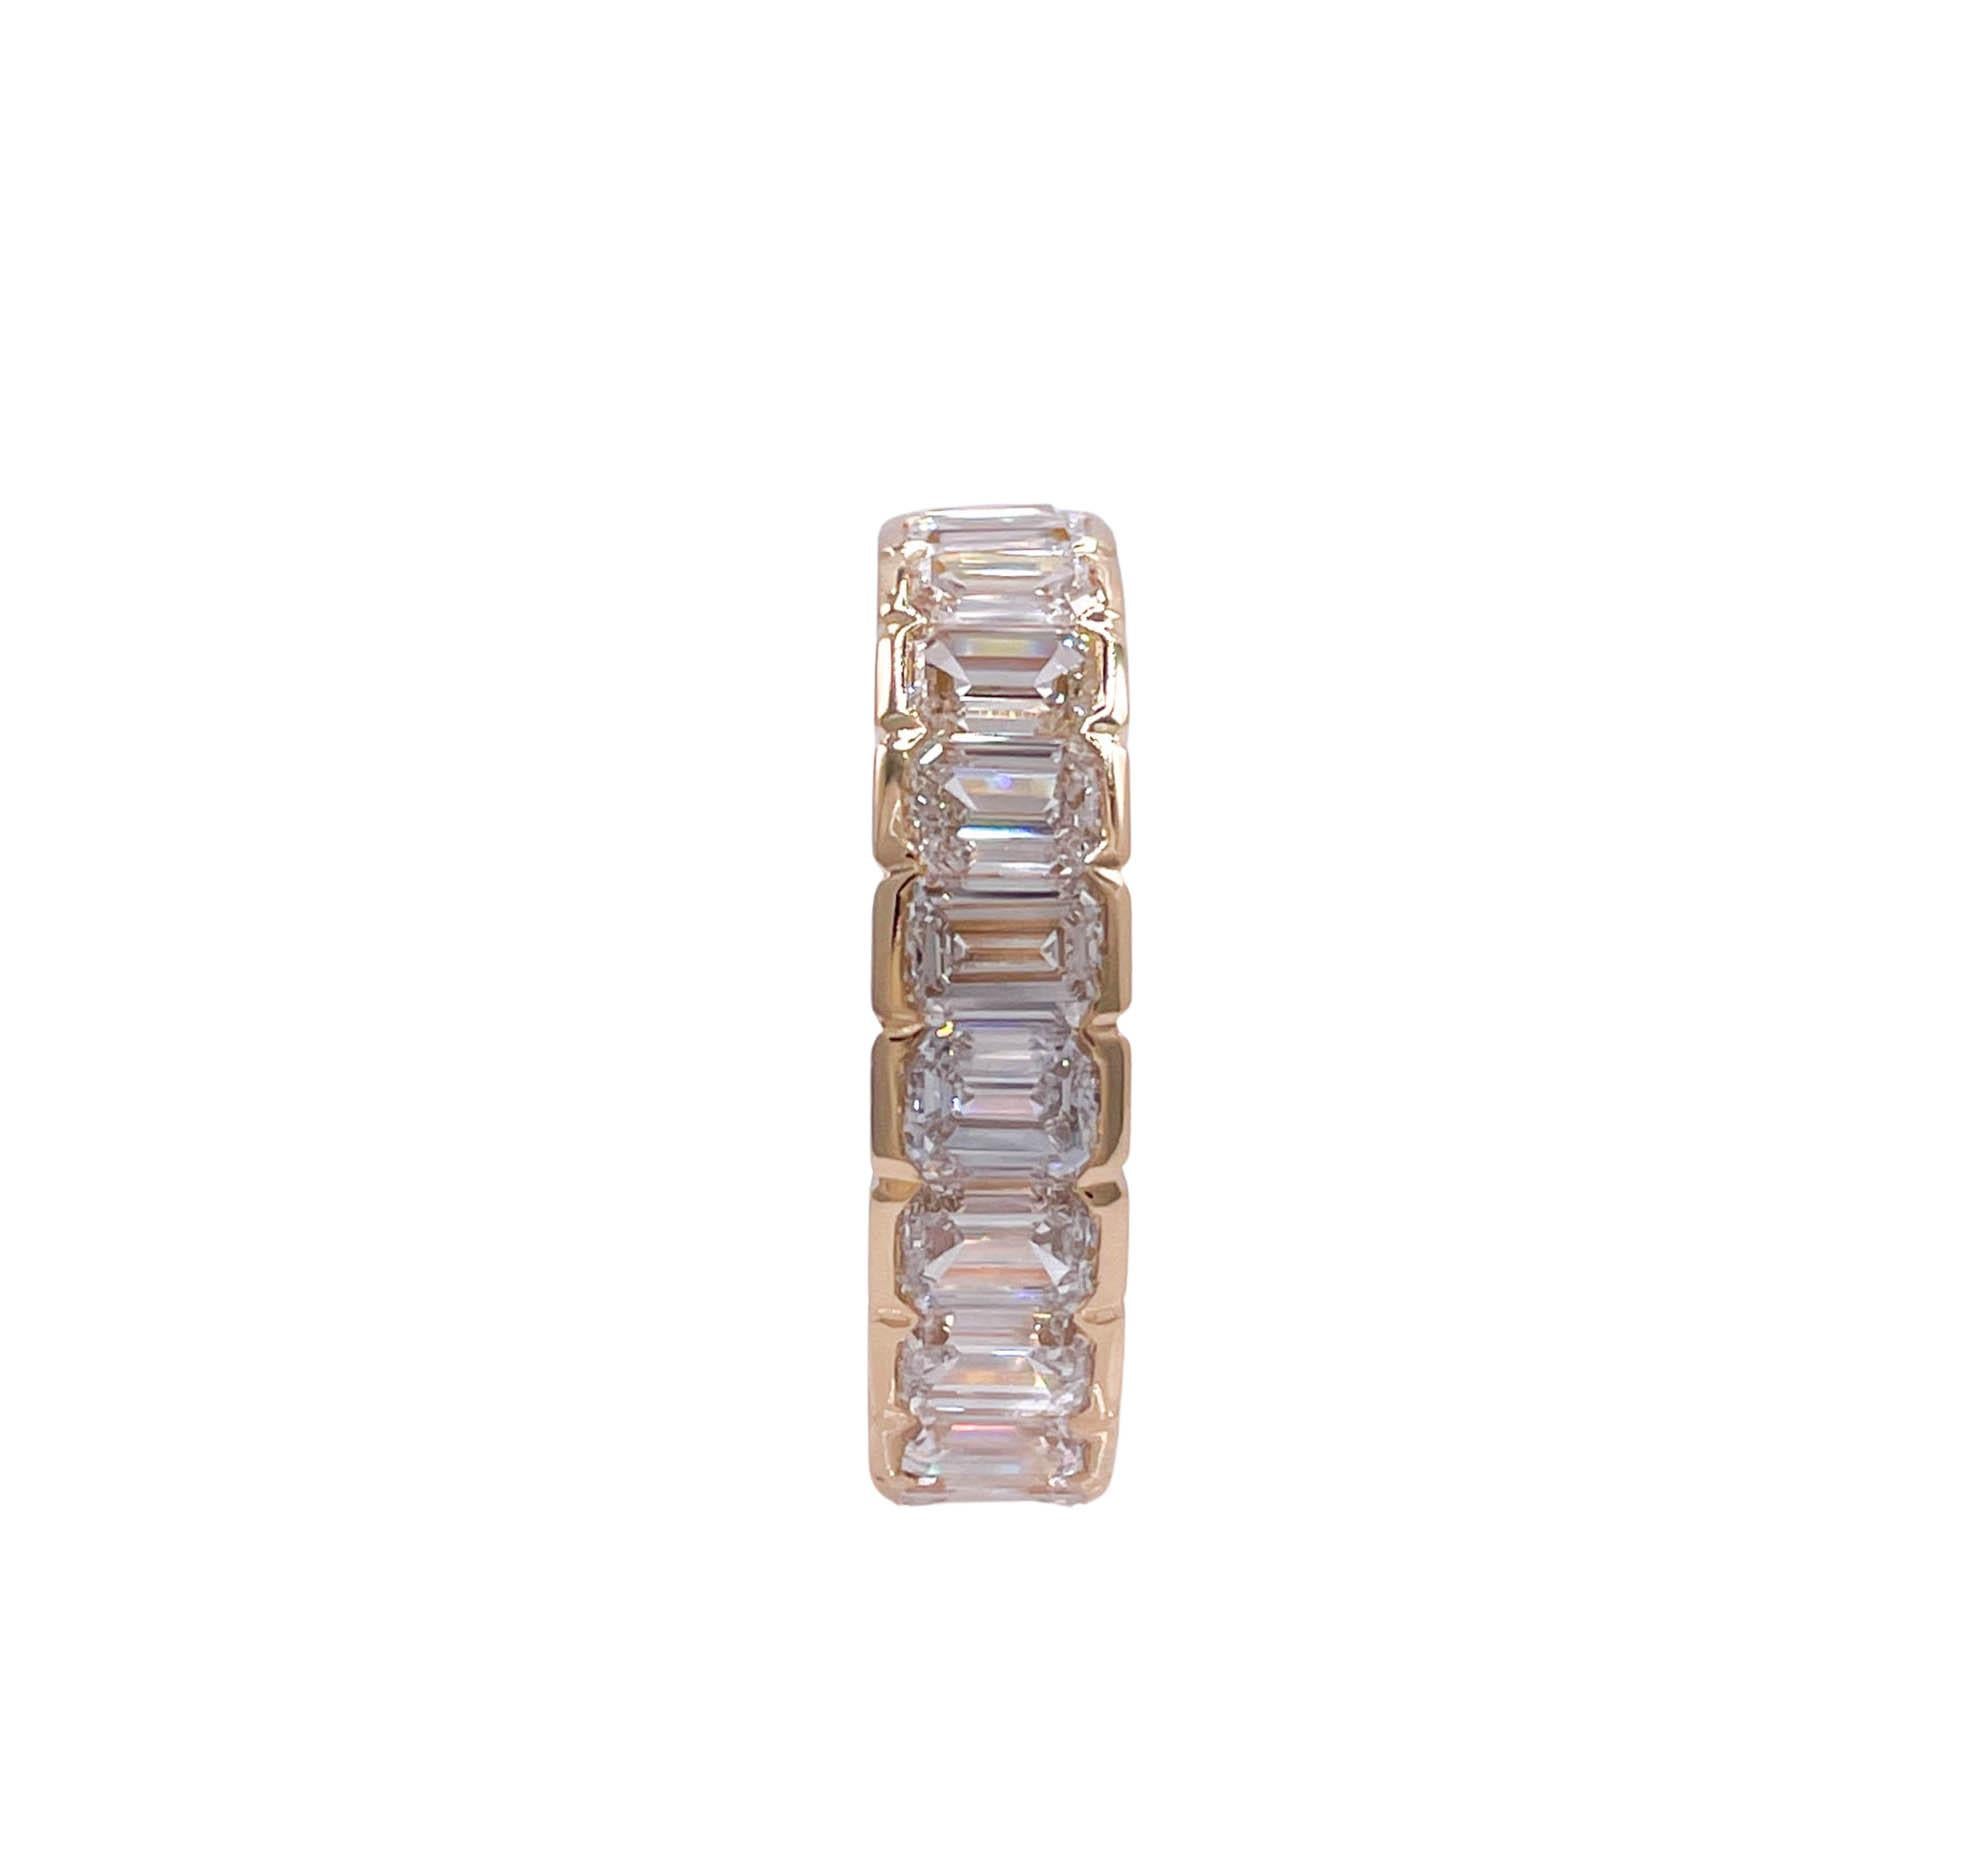 Jay Feder 18k Yellow Gold Emerald cut Diamond Eternity Wedding Band

There are 22 Emerald cut diamonds set in channel set eternity band; total carat weight is 6.86 carats; VS clarity overall.

Sits 3.09mm from the top off the finger. The band is